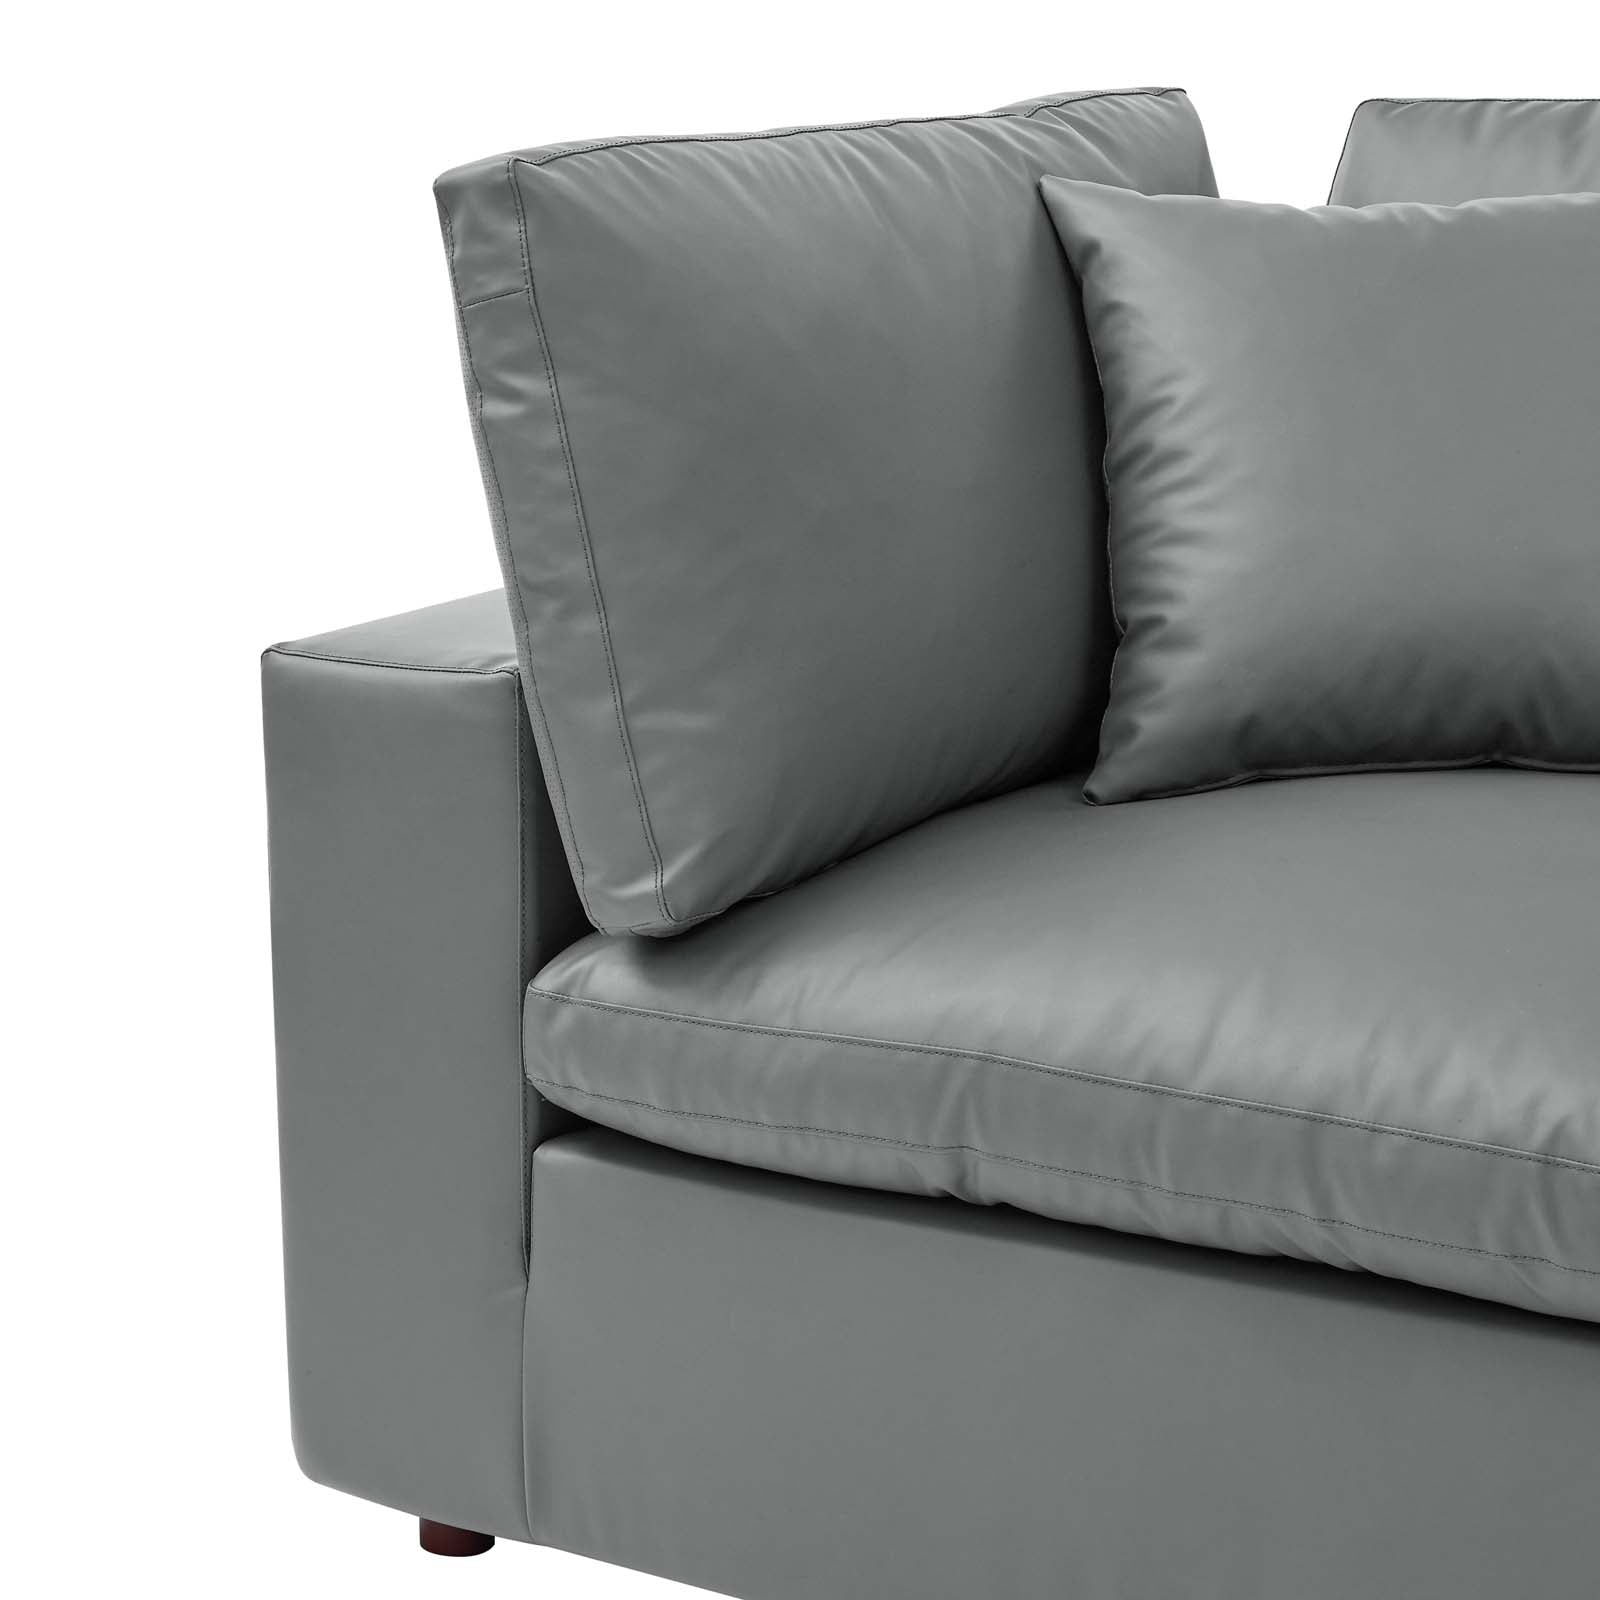 Modway Accent Chairs - Commix Down Filled Overstuffed Vegan Leather Corner Chair Gray